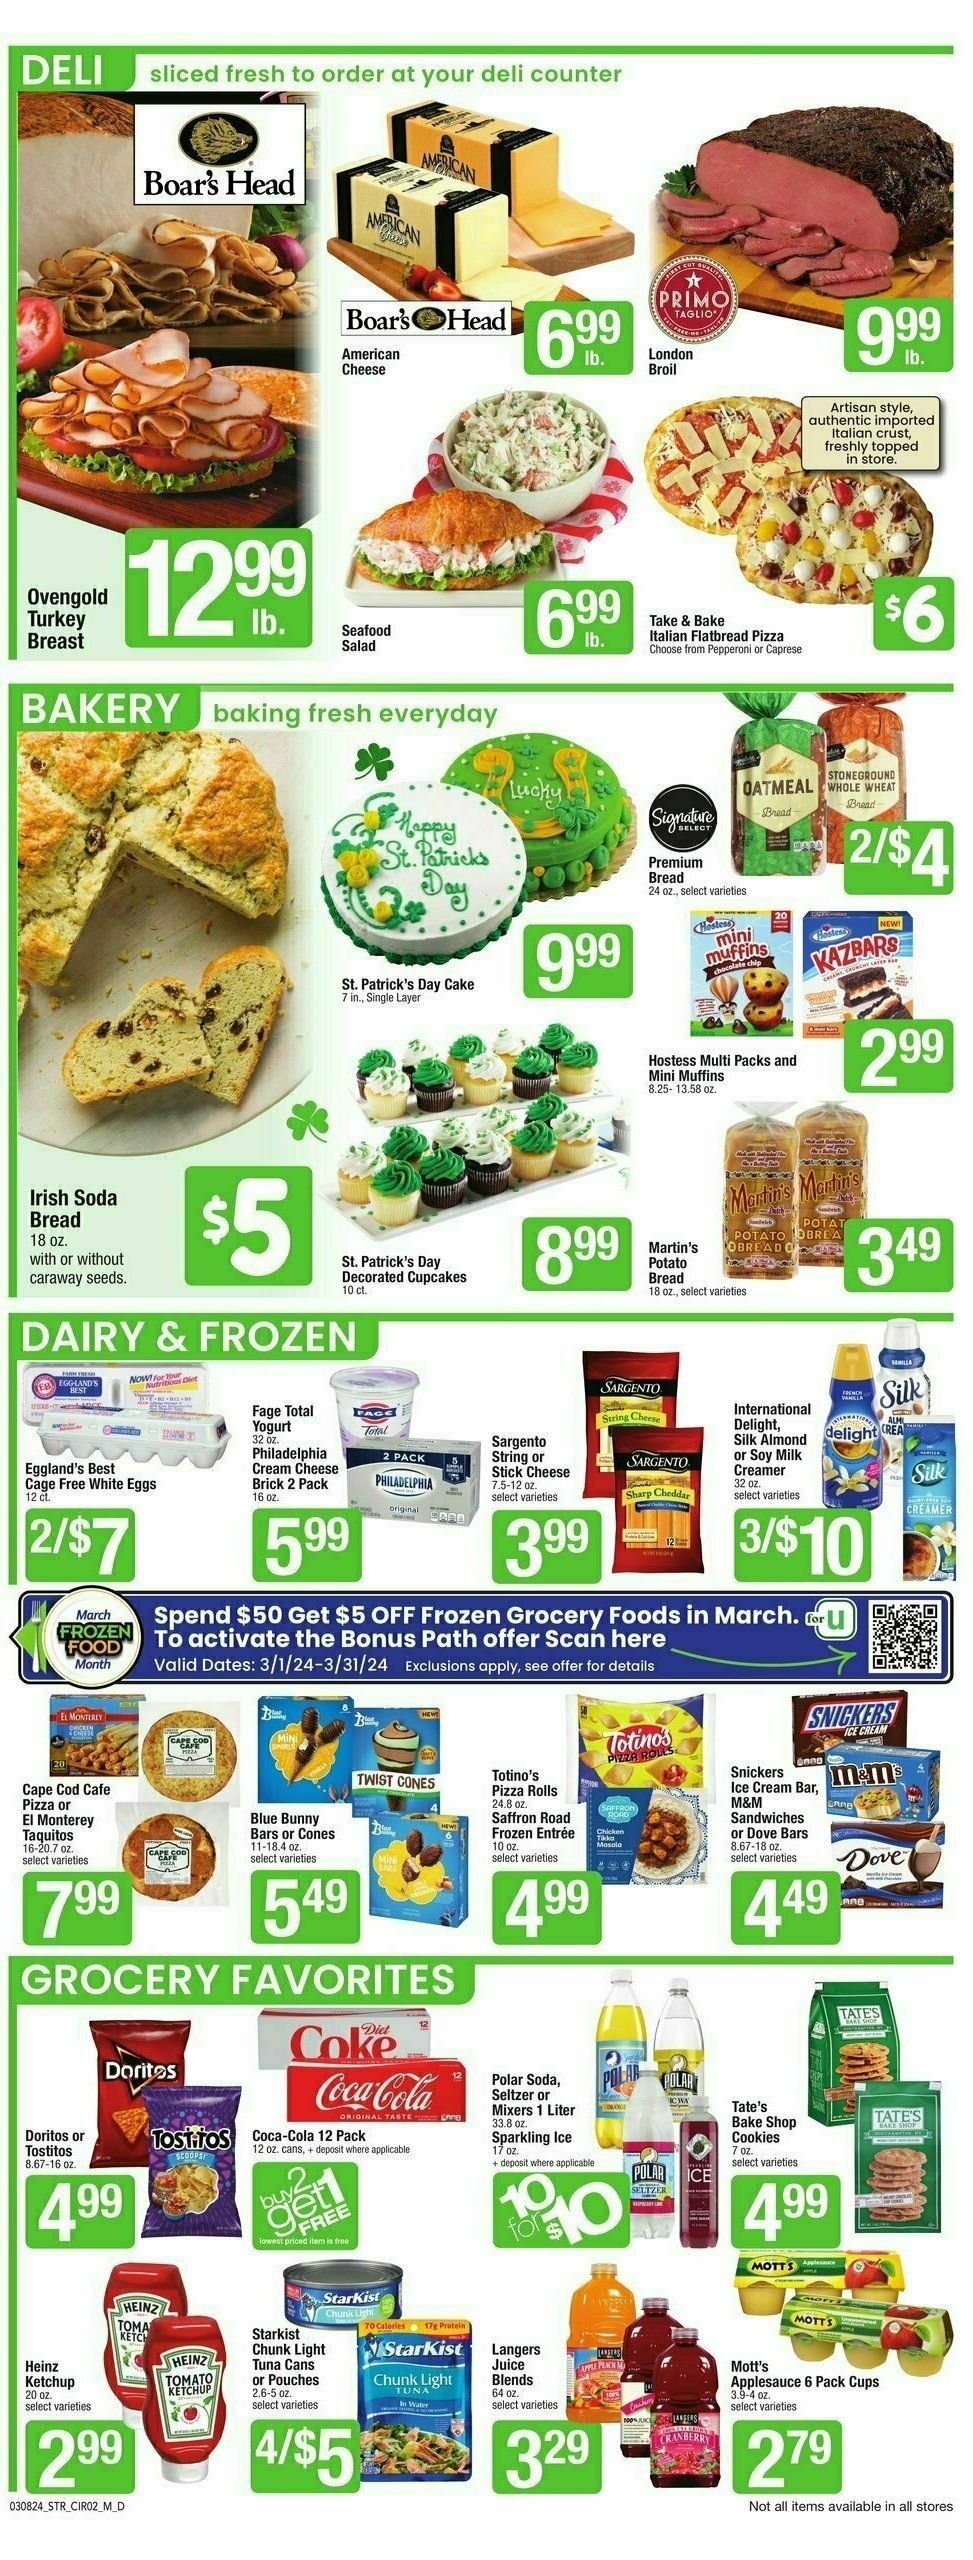 Star Market Weekly Ad from March 8